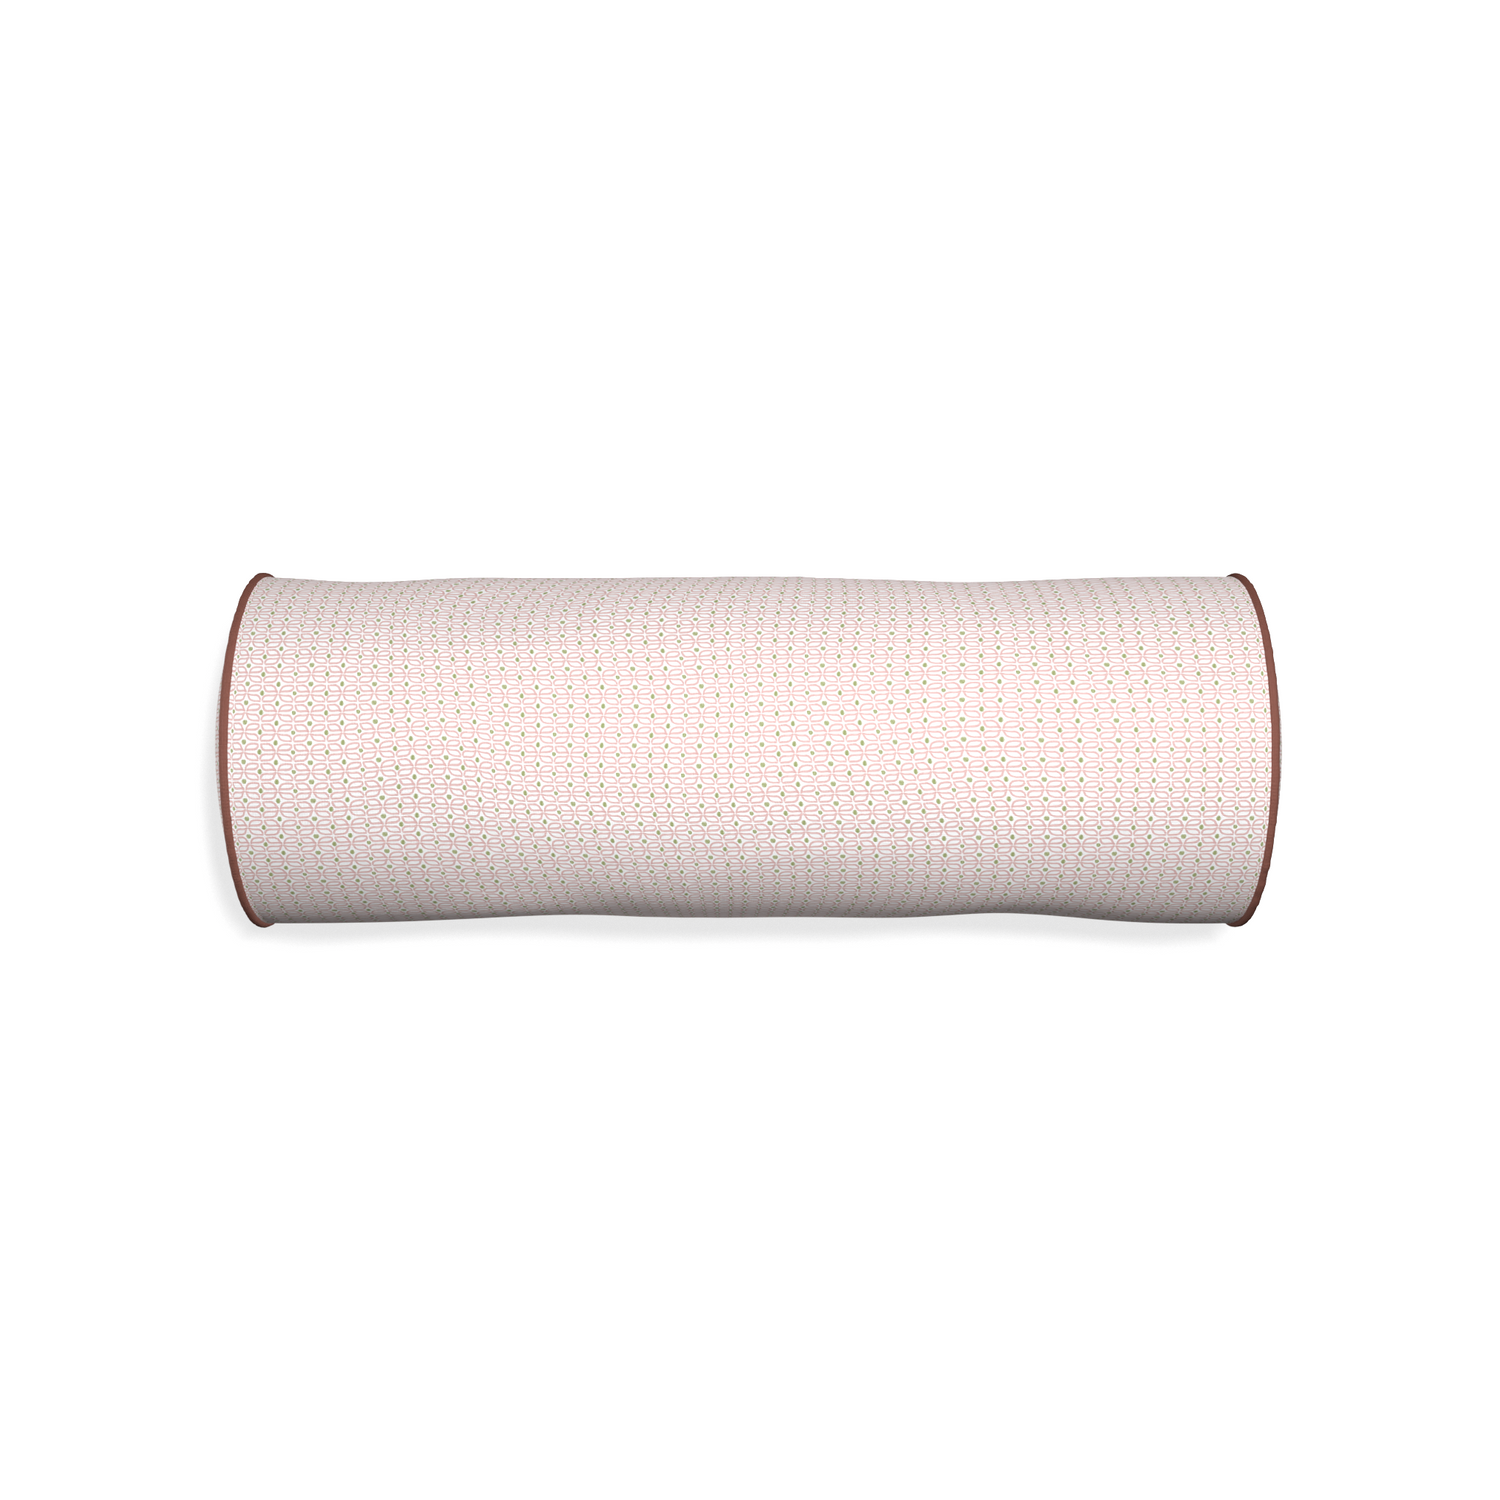 Bolster loomi pink custom pink geometricpillow with w piping on white background